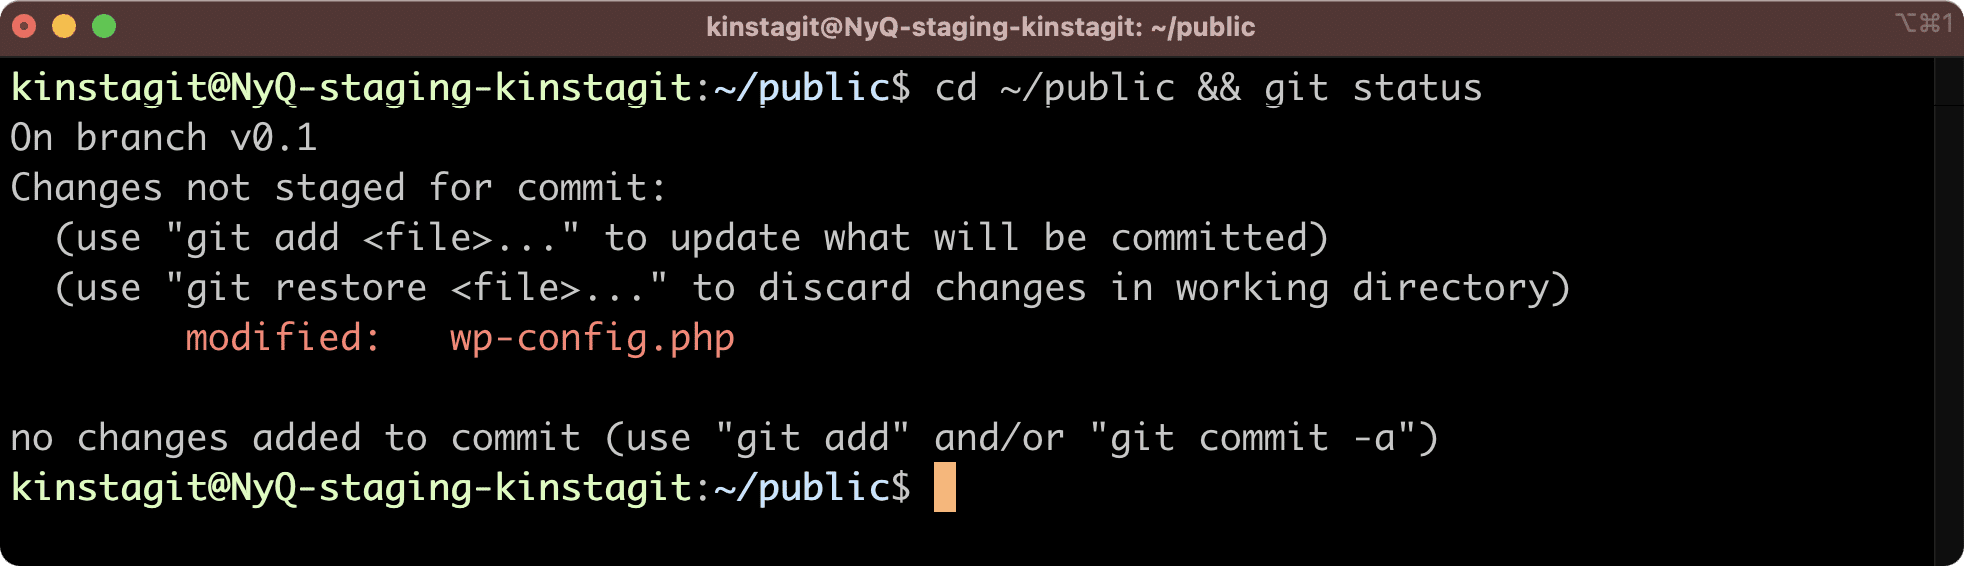 Changed files in the Kinsta staging environment.